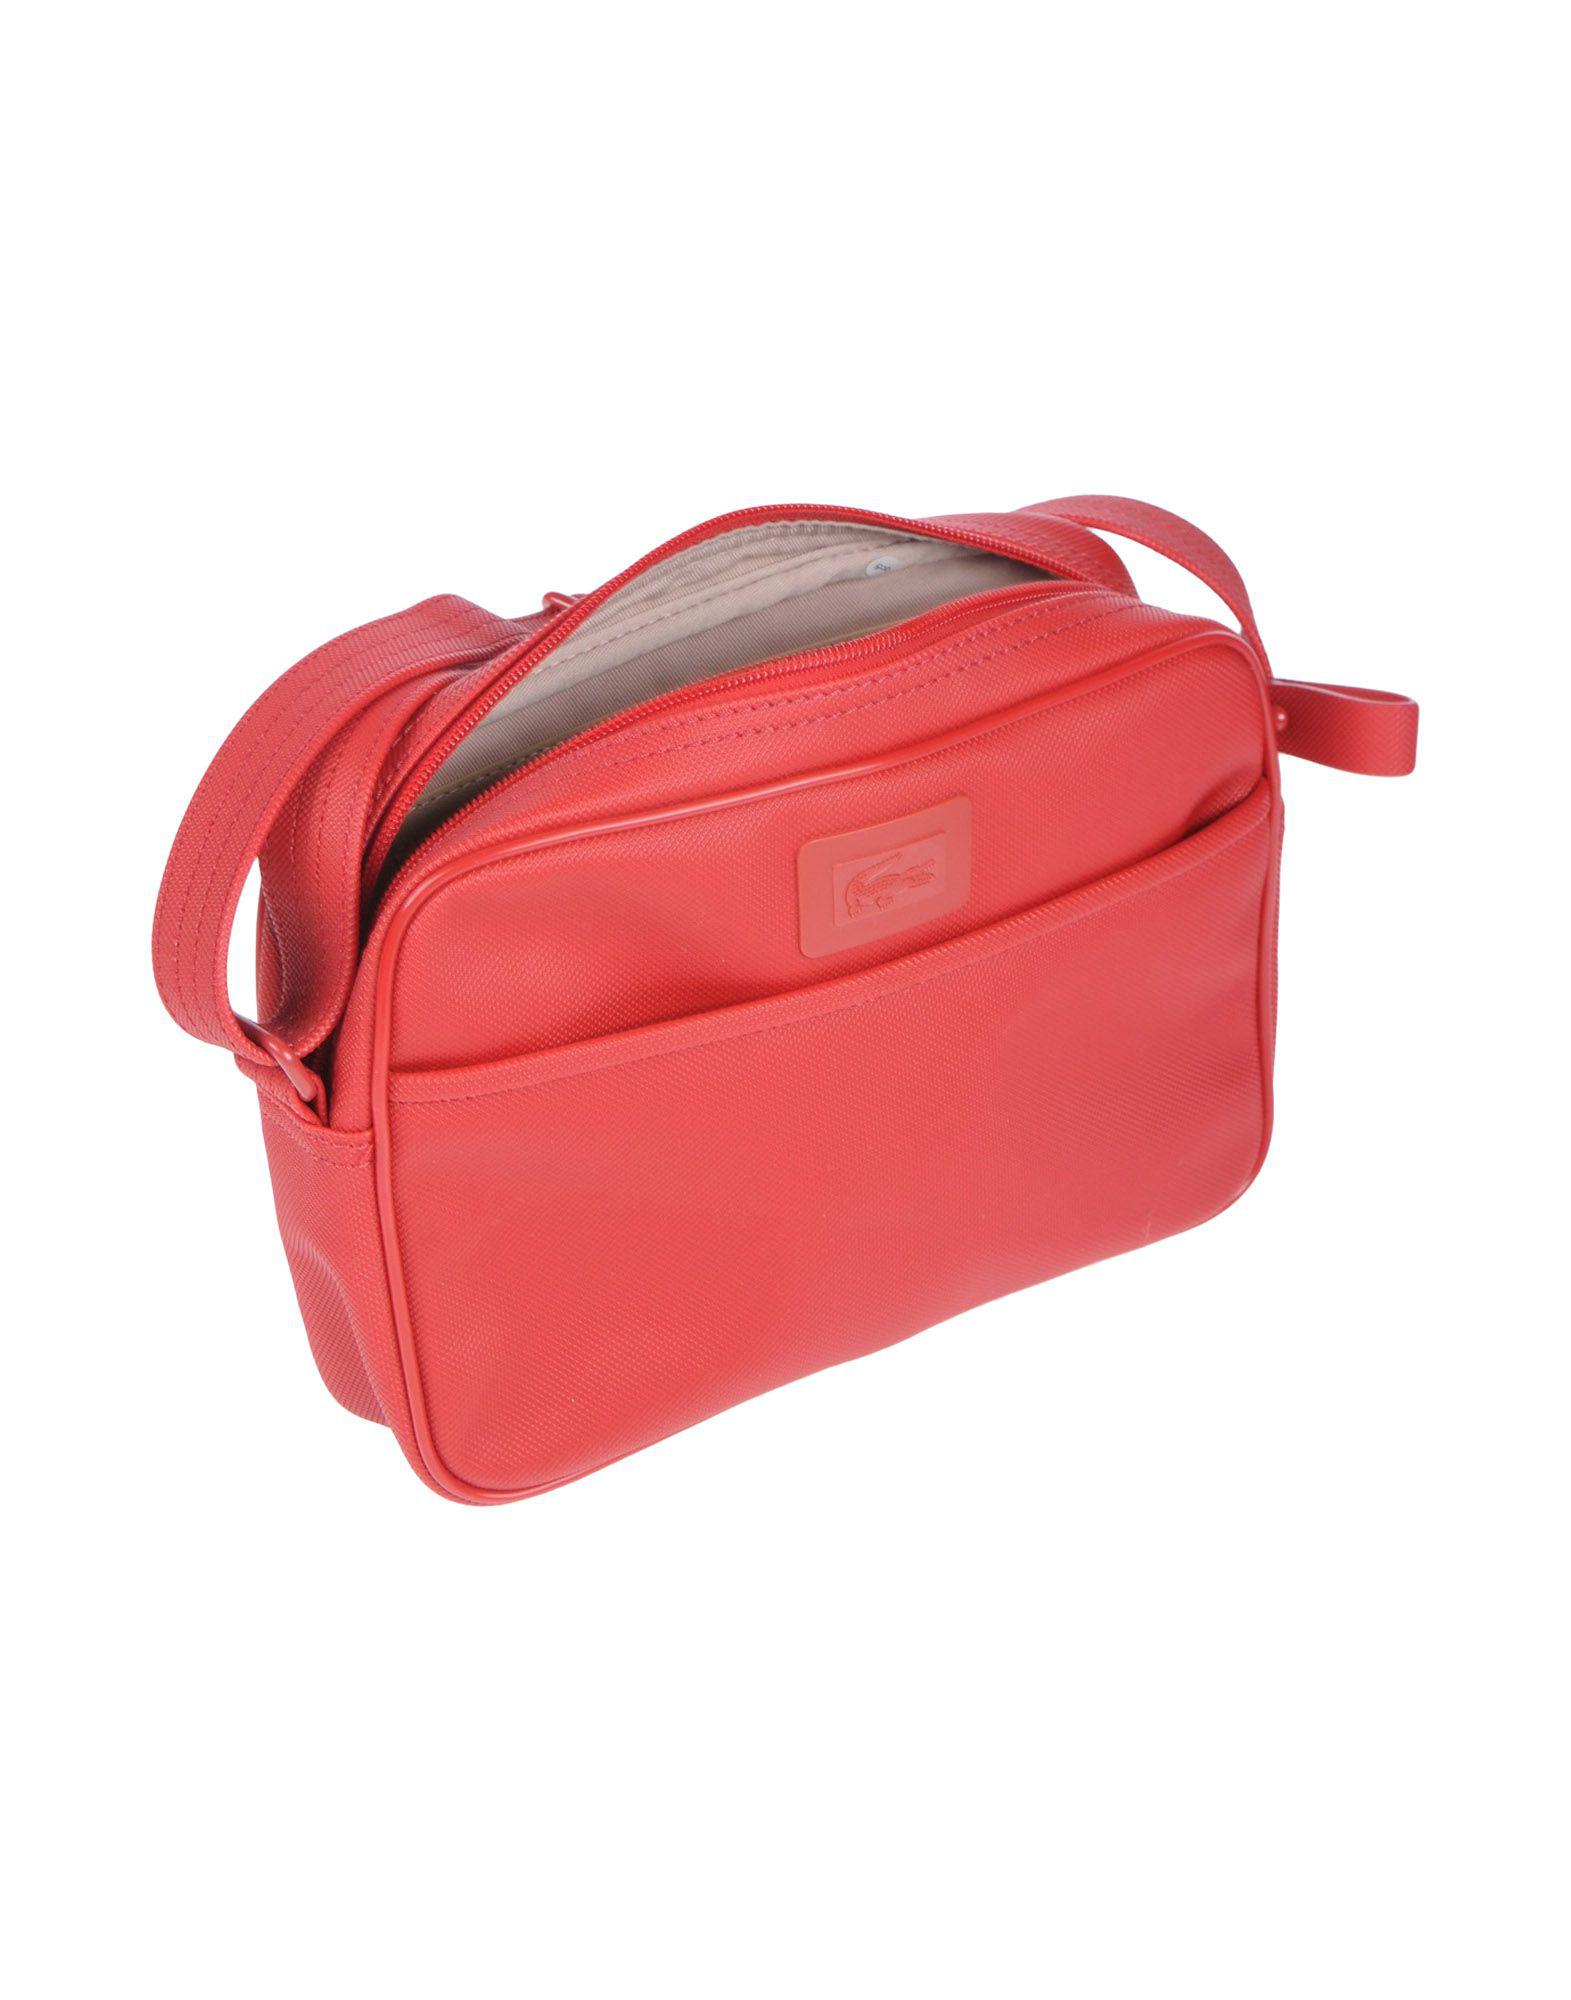 Lacoste Synthetic Bag in Red - Lyst